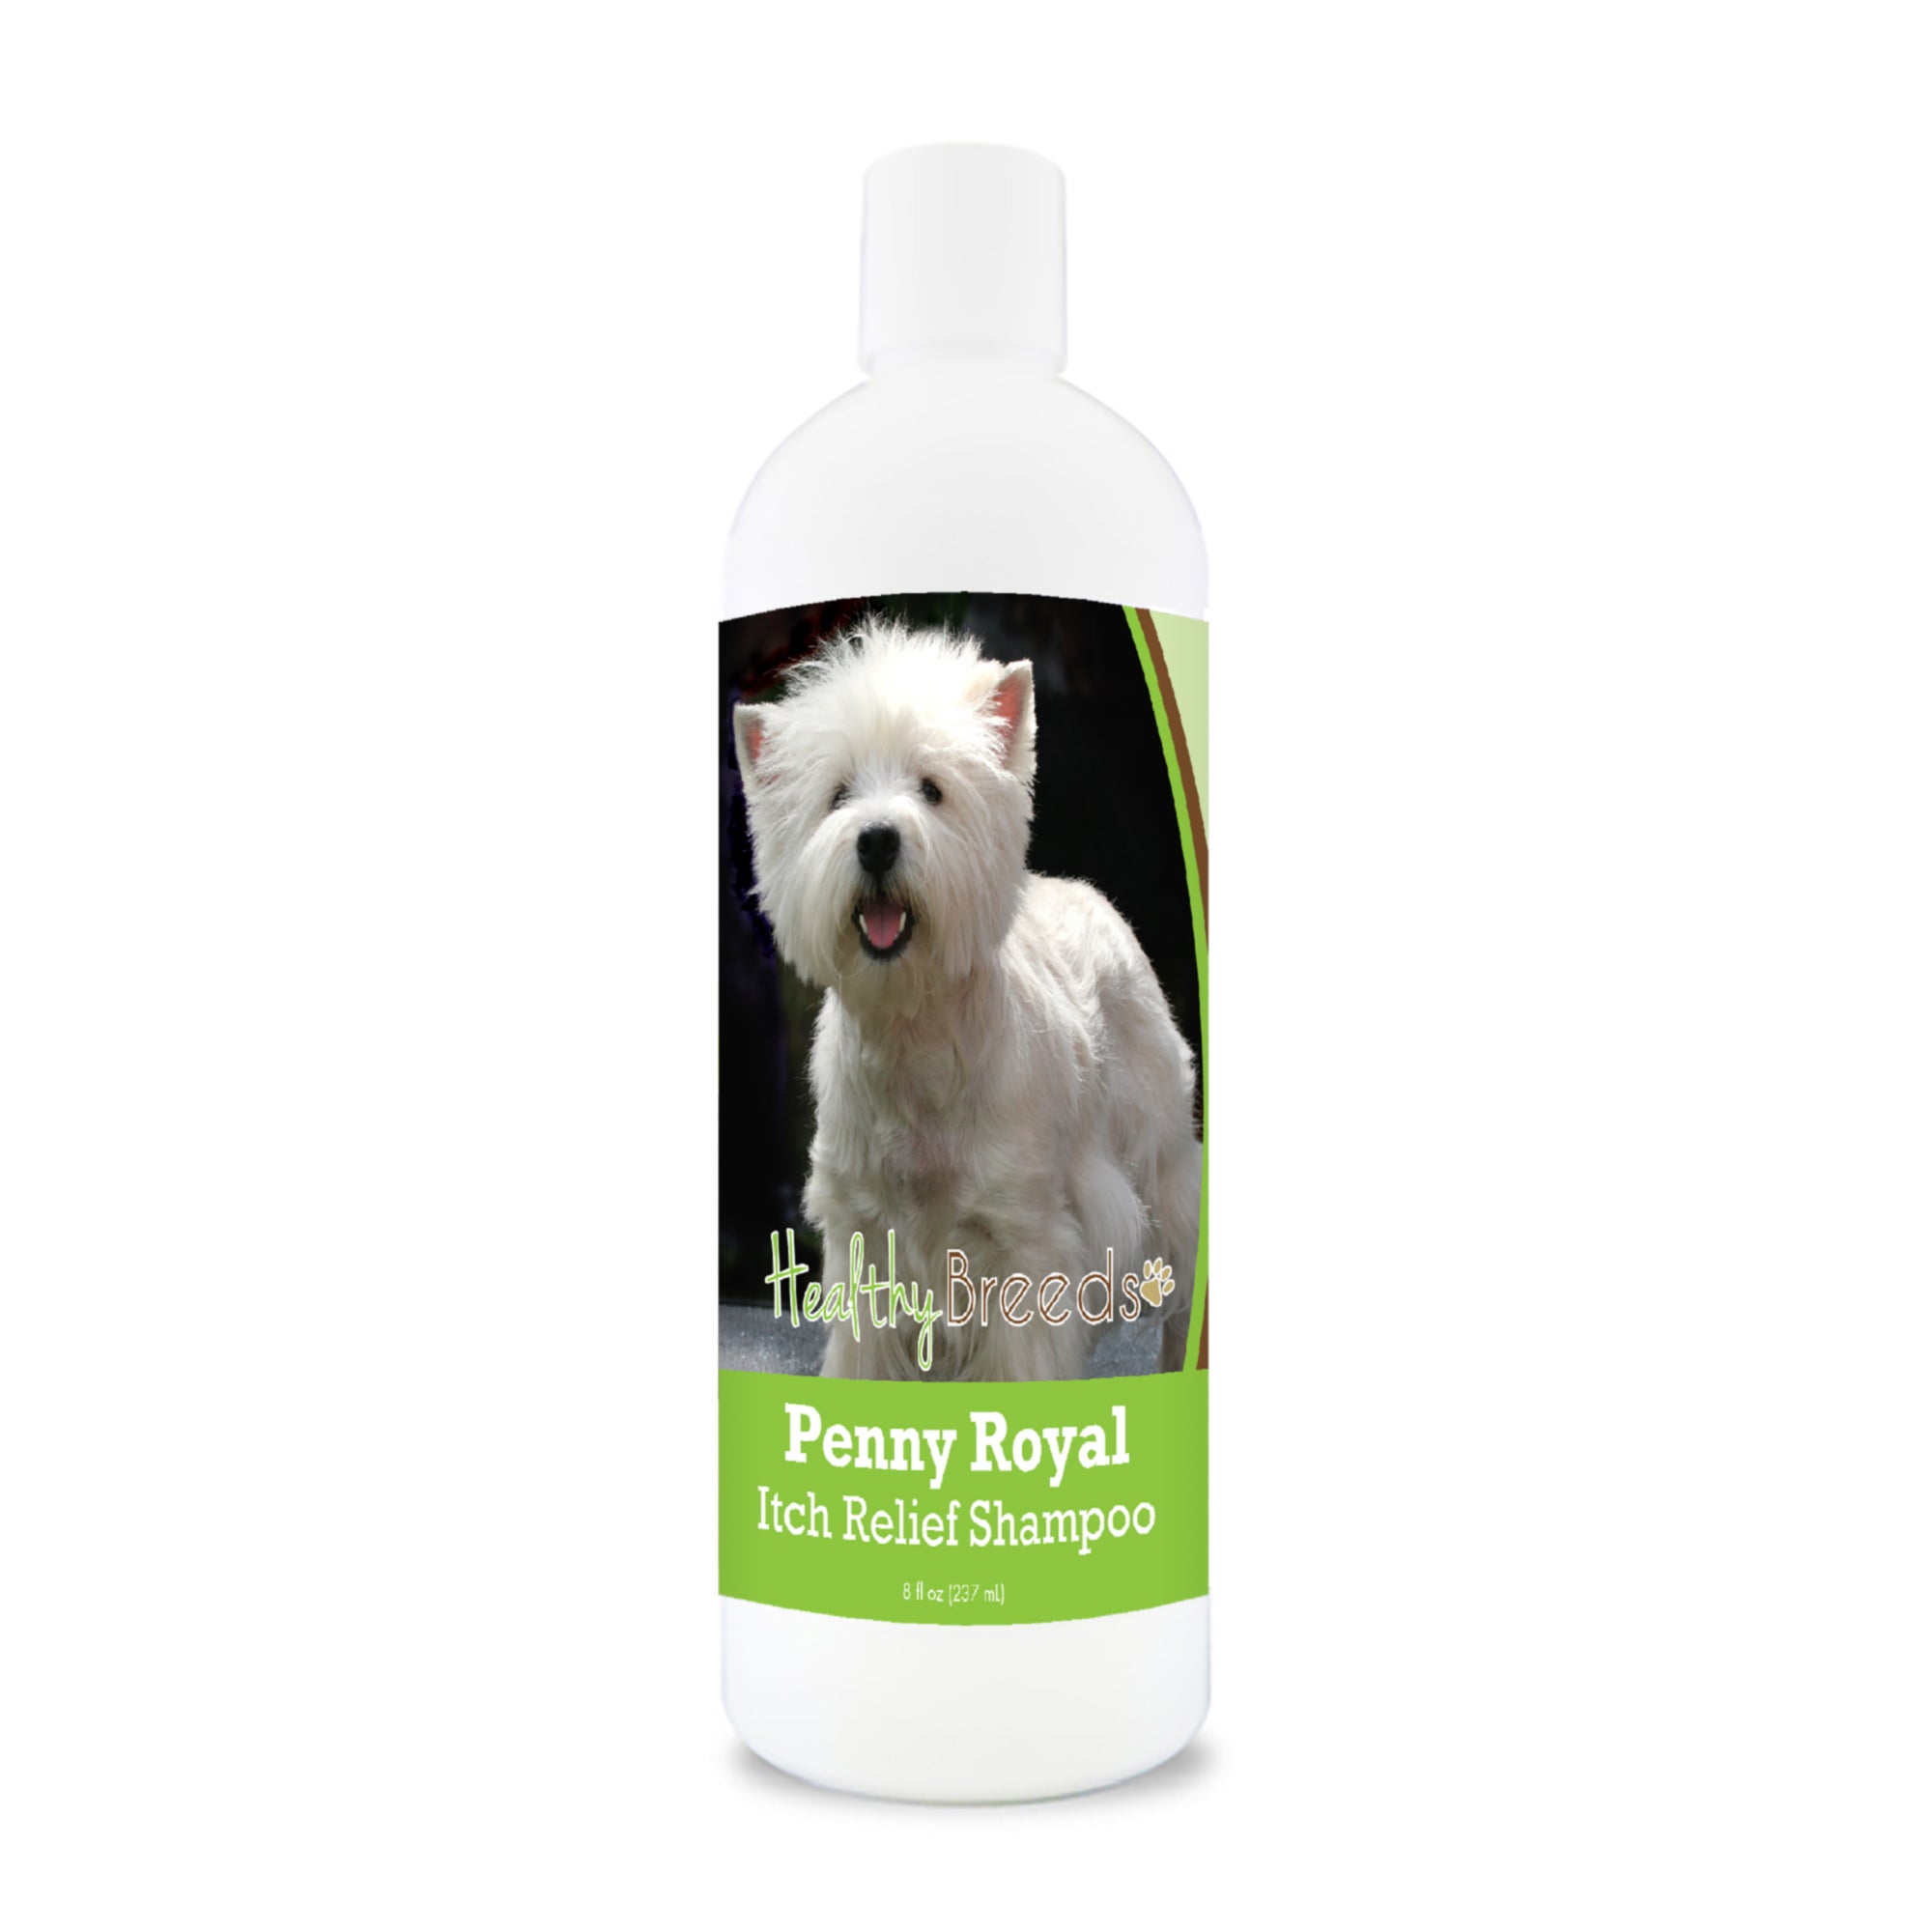 West Highland White Terrier Penny Royal Itch Relief Shampoo 8 oz